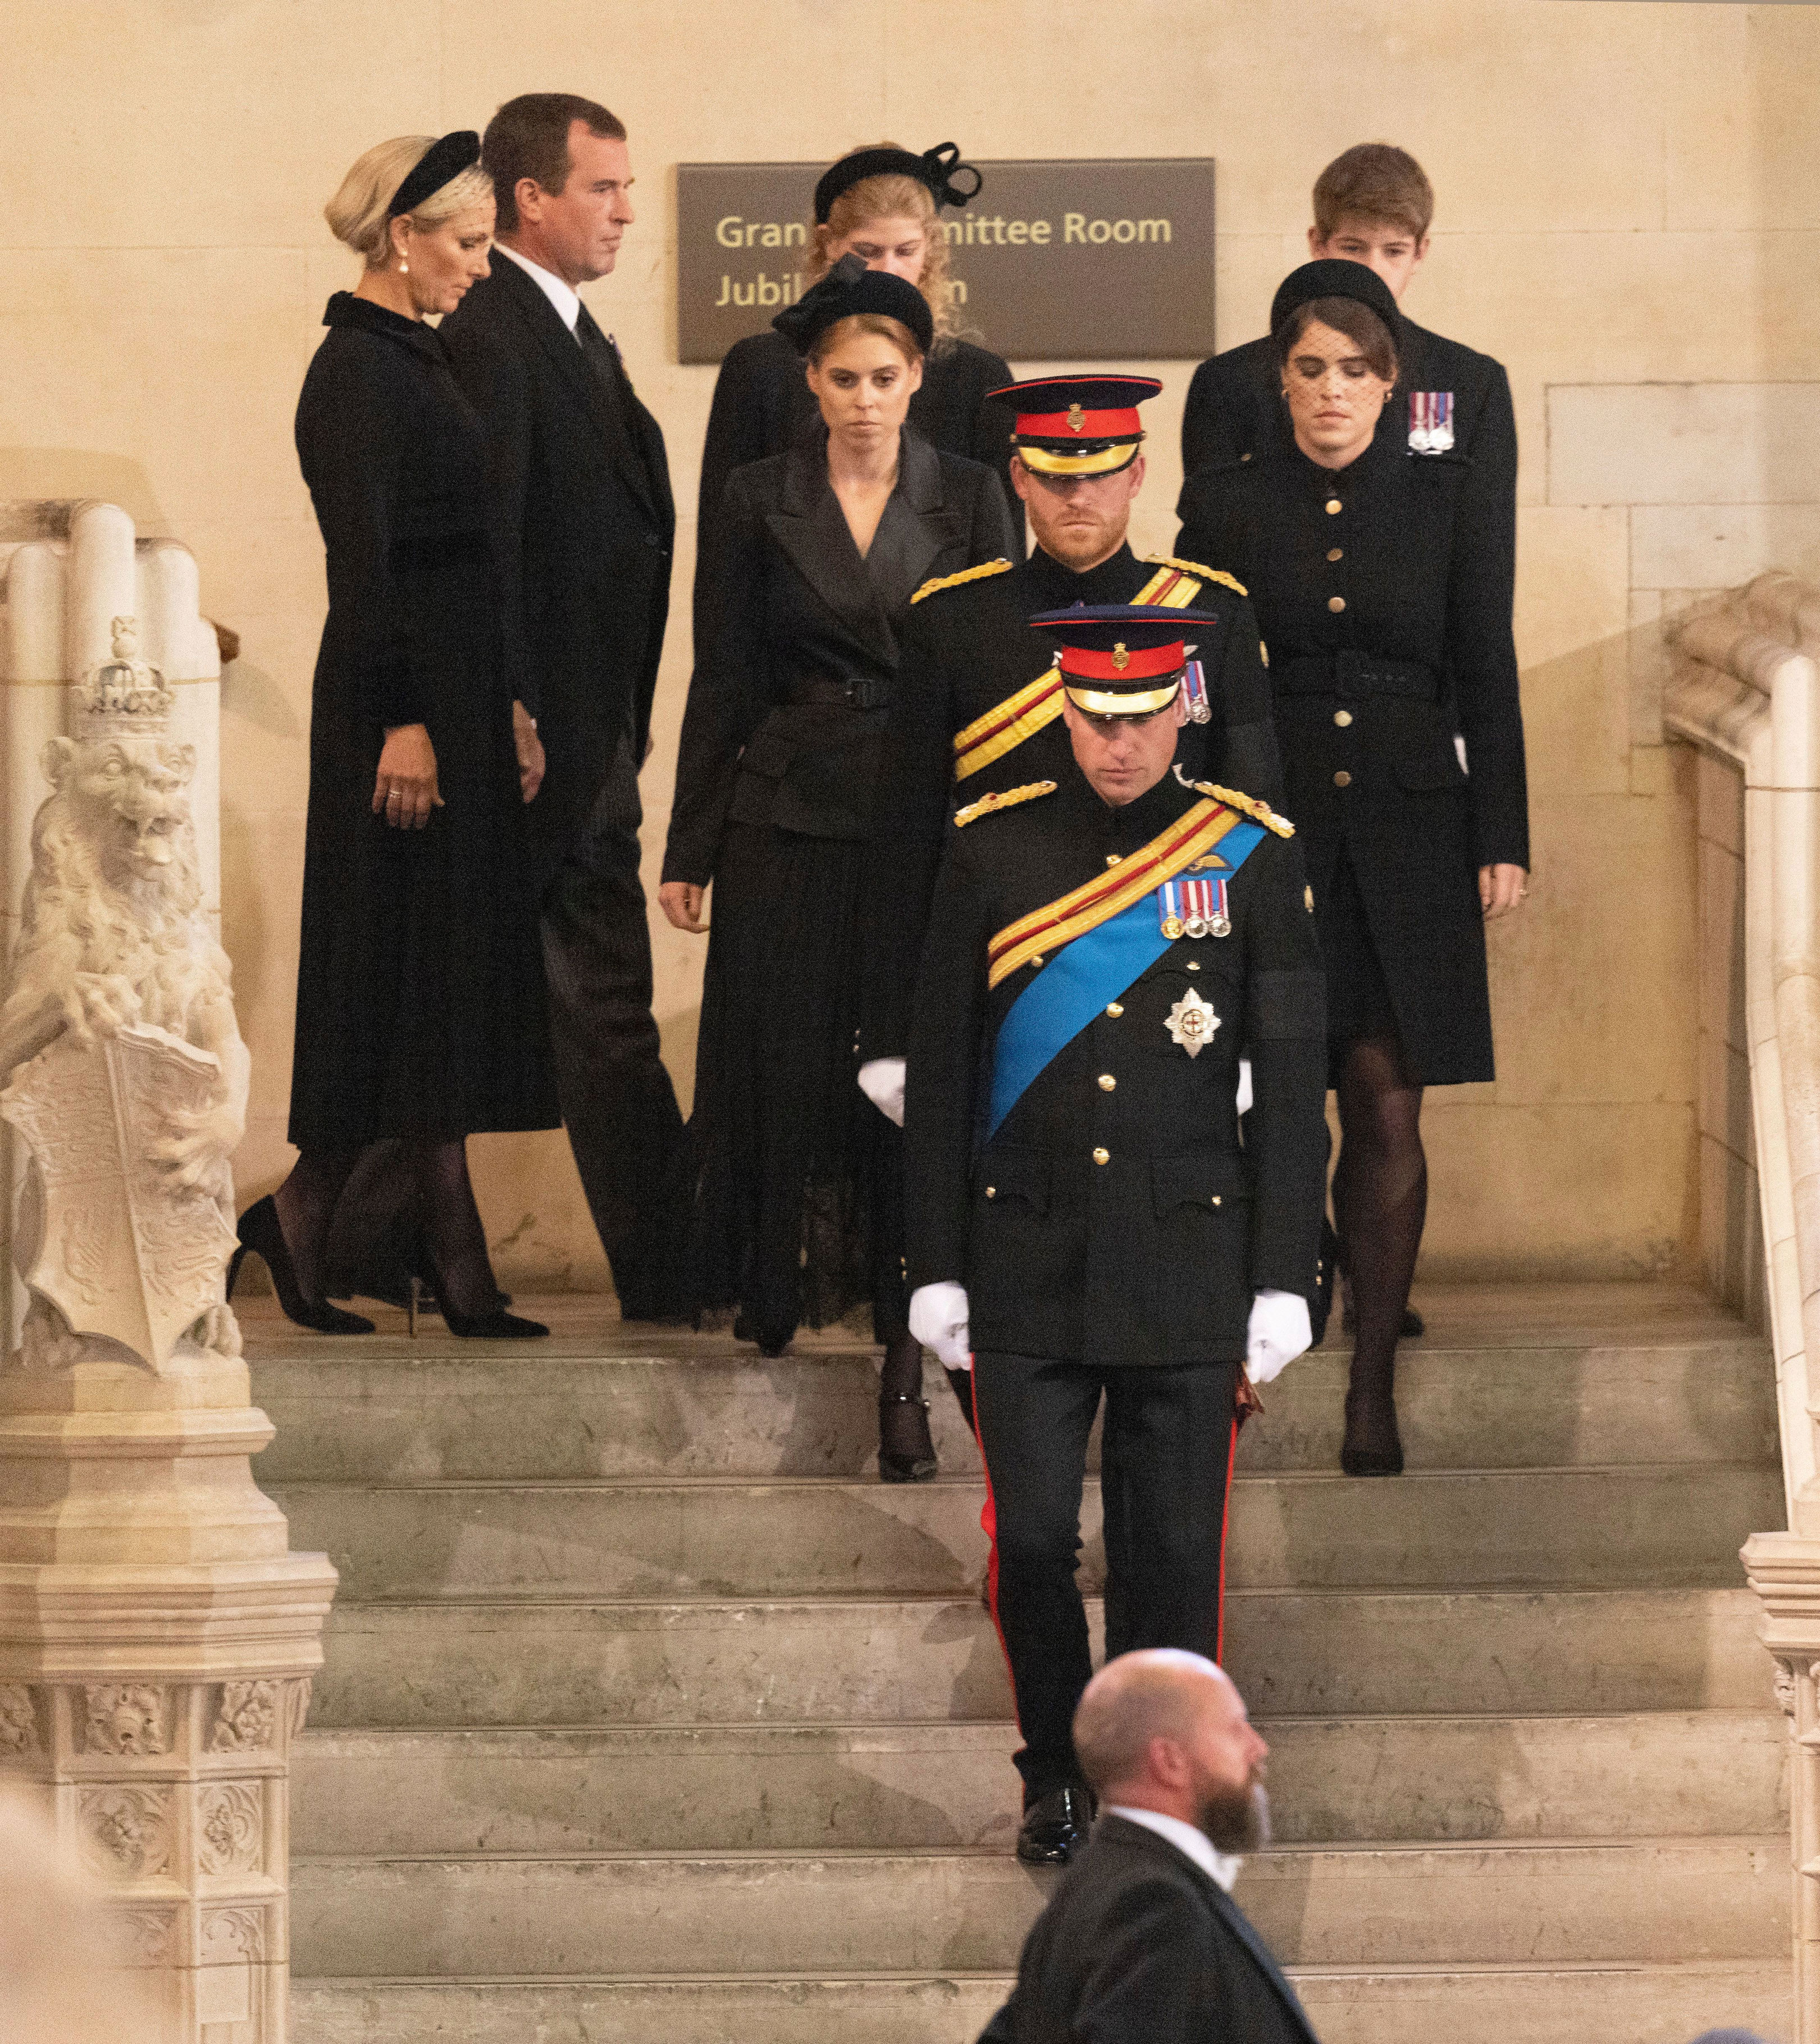 <p>Queen Elizabeth II's grandchildren -- Zara Tindall and brother Peter Phillips; Lady Louise Windsor and brother James, Viscount Severn; Princess Beatrice and sister Princess Eugenie; and <a href="https://www.wonderwall.com/celebrity/profiles/overview/prince-william-482.article">Prince William</a> and brother <a href="https://www.wonderwall.com/celebrity/profiles/overview/prince-harry-481.article">Prince Harry</a> -- made their way down a staircase in Westminster Hall at the Palace of Westminster in London on Sept. 17, 2022, during the late monarch's lying-in-state before taking their places around her coffin to hold vigil two days before her funeral.</p>